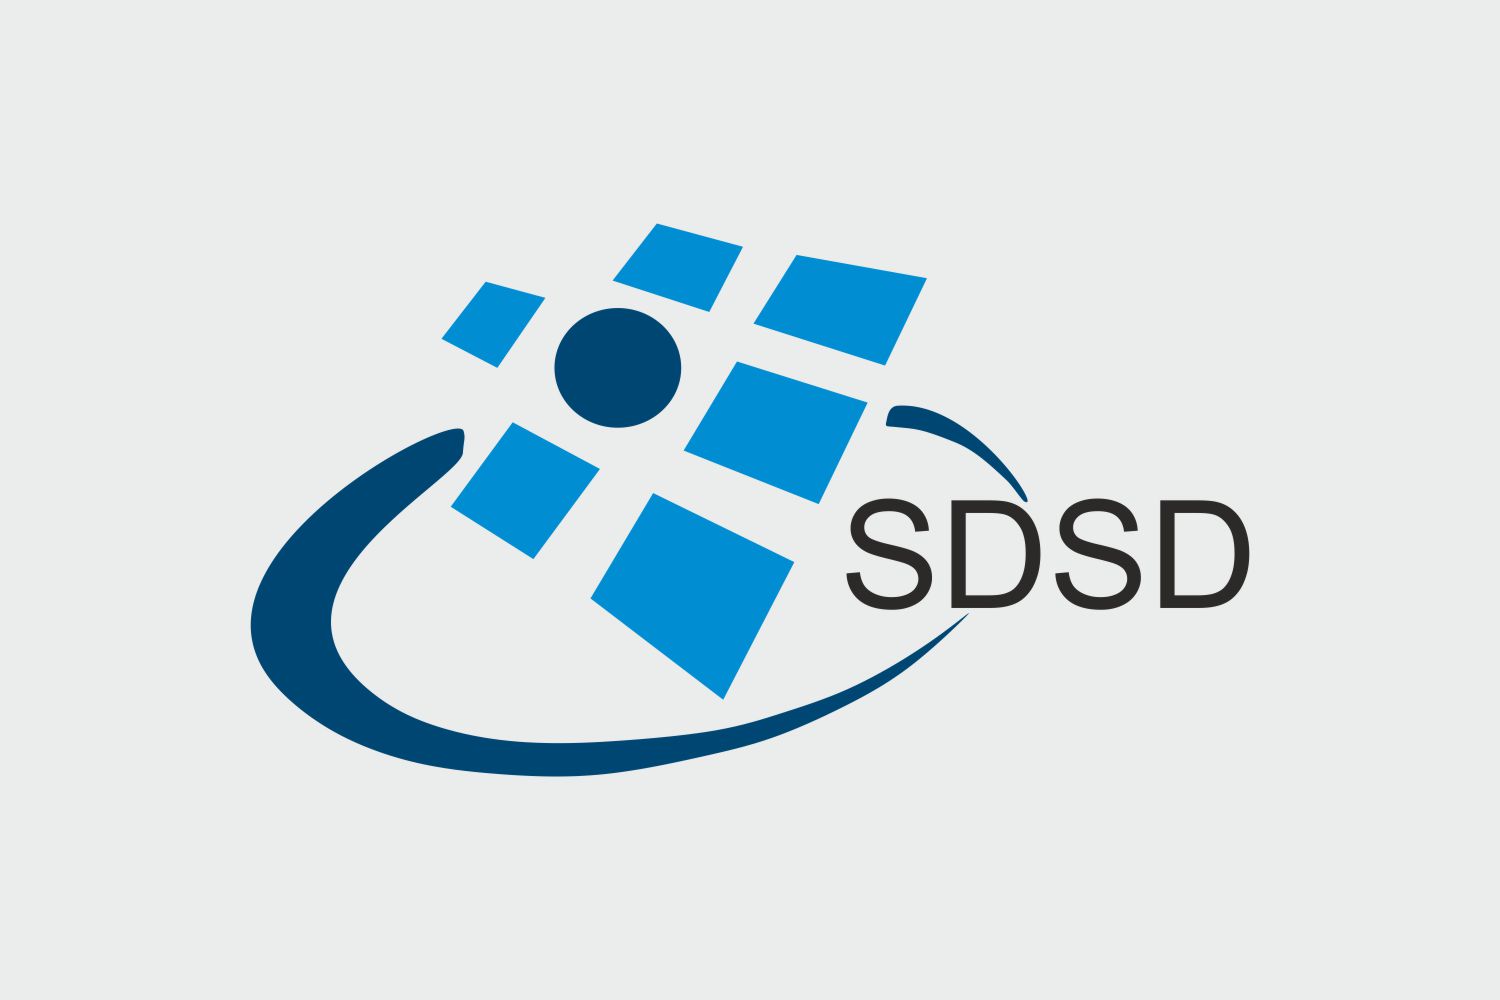 SDSD - social dialogue for sustainable development and decent work